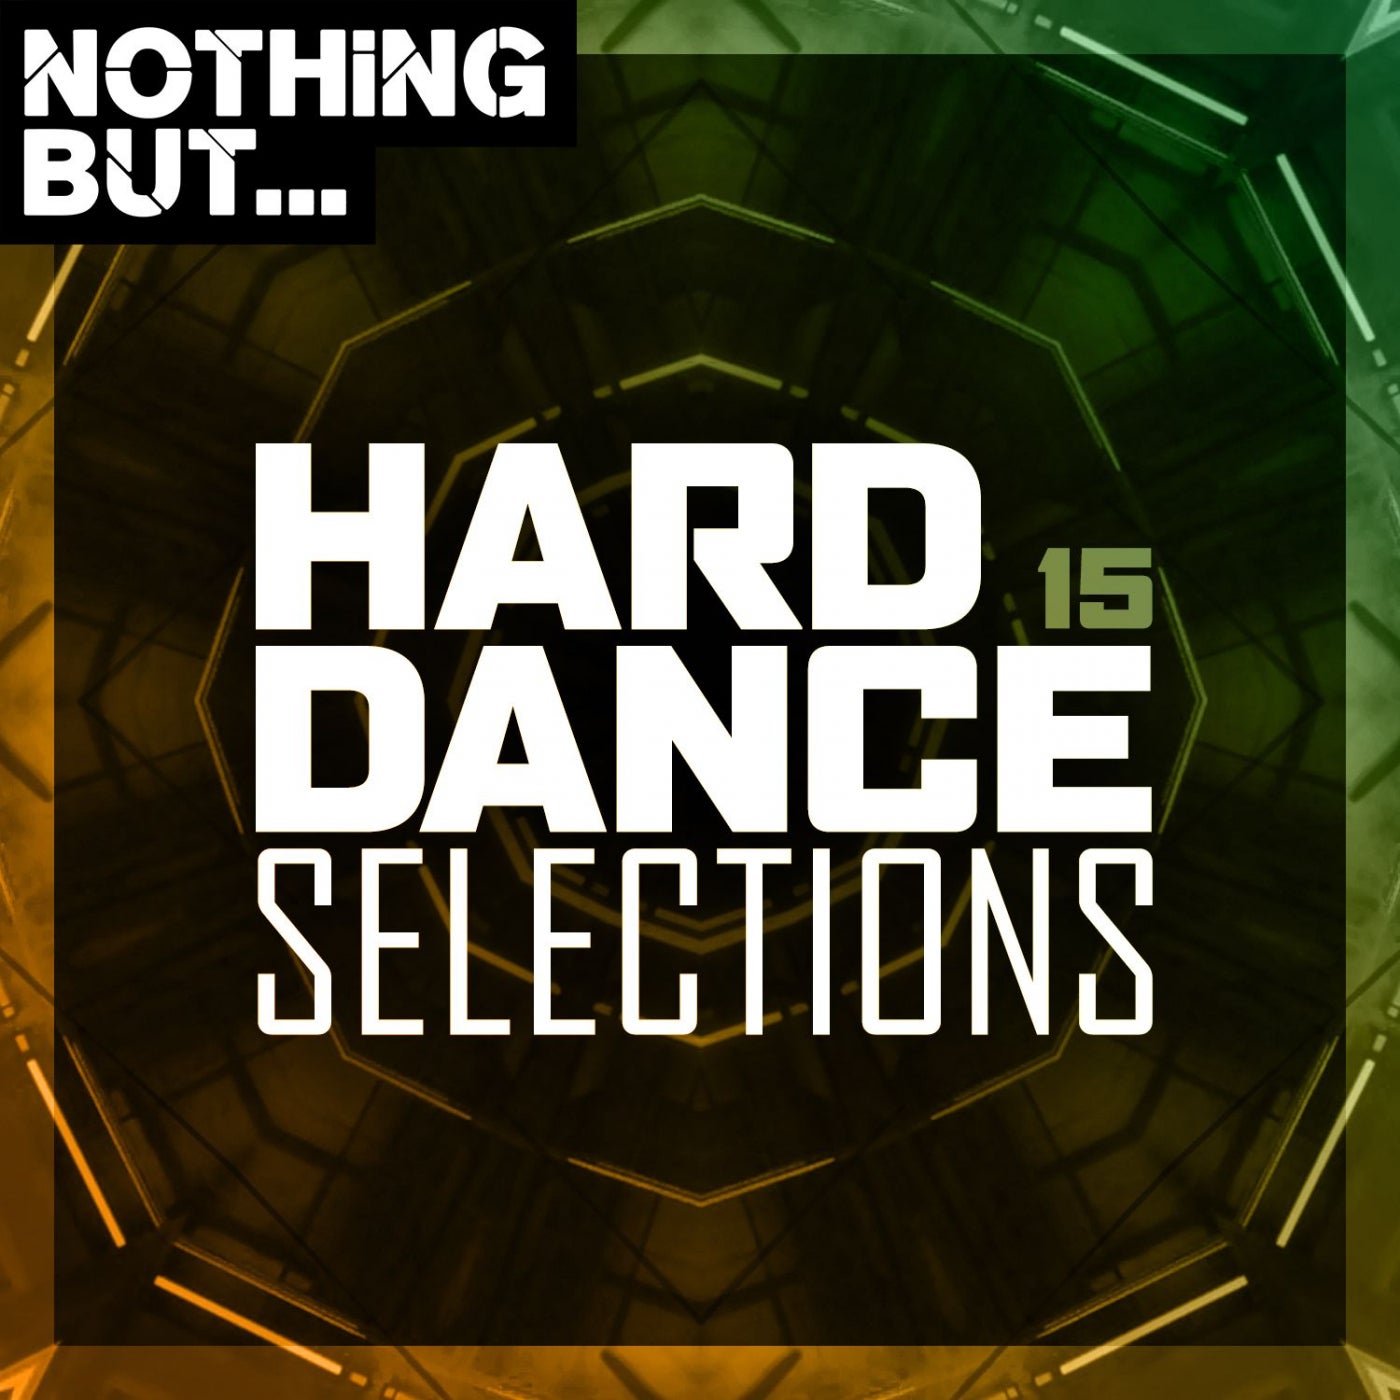 Nothing But... Hard Dance Selections, Vol. 15